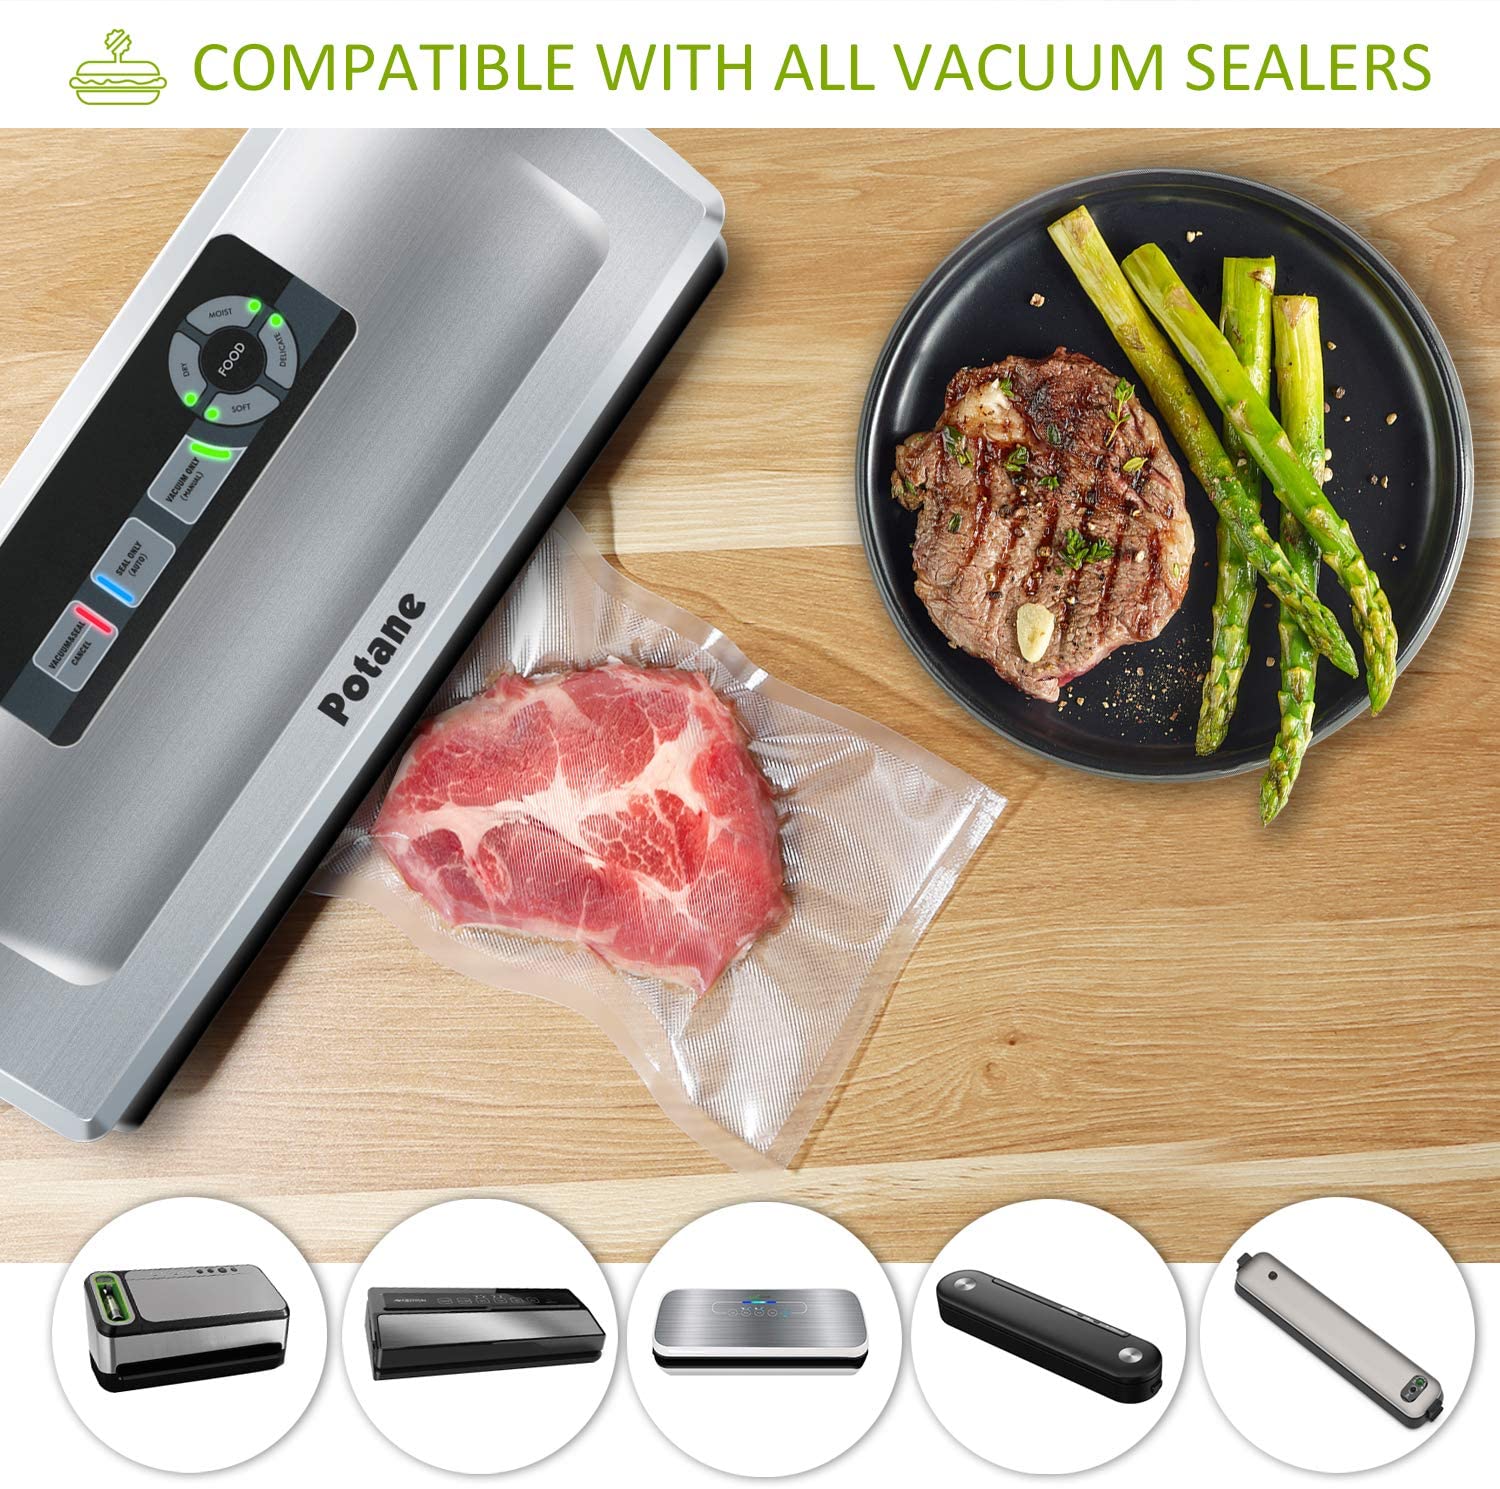 Potane Potane Precision Vacuum Sealer Machine,Pro Food Sealer with Built-in  Cutter and Bag Storage(Up to 20 Feet Length), Both Auto&Manual Options,2 F  for Sale in North Las Vegas, NV - OfferUp